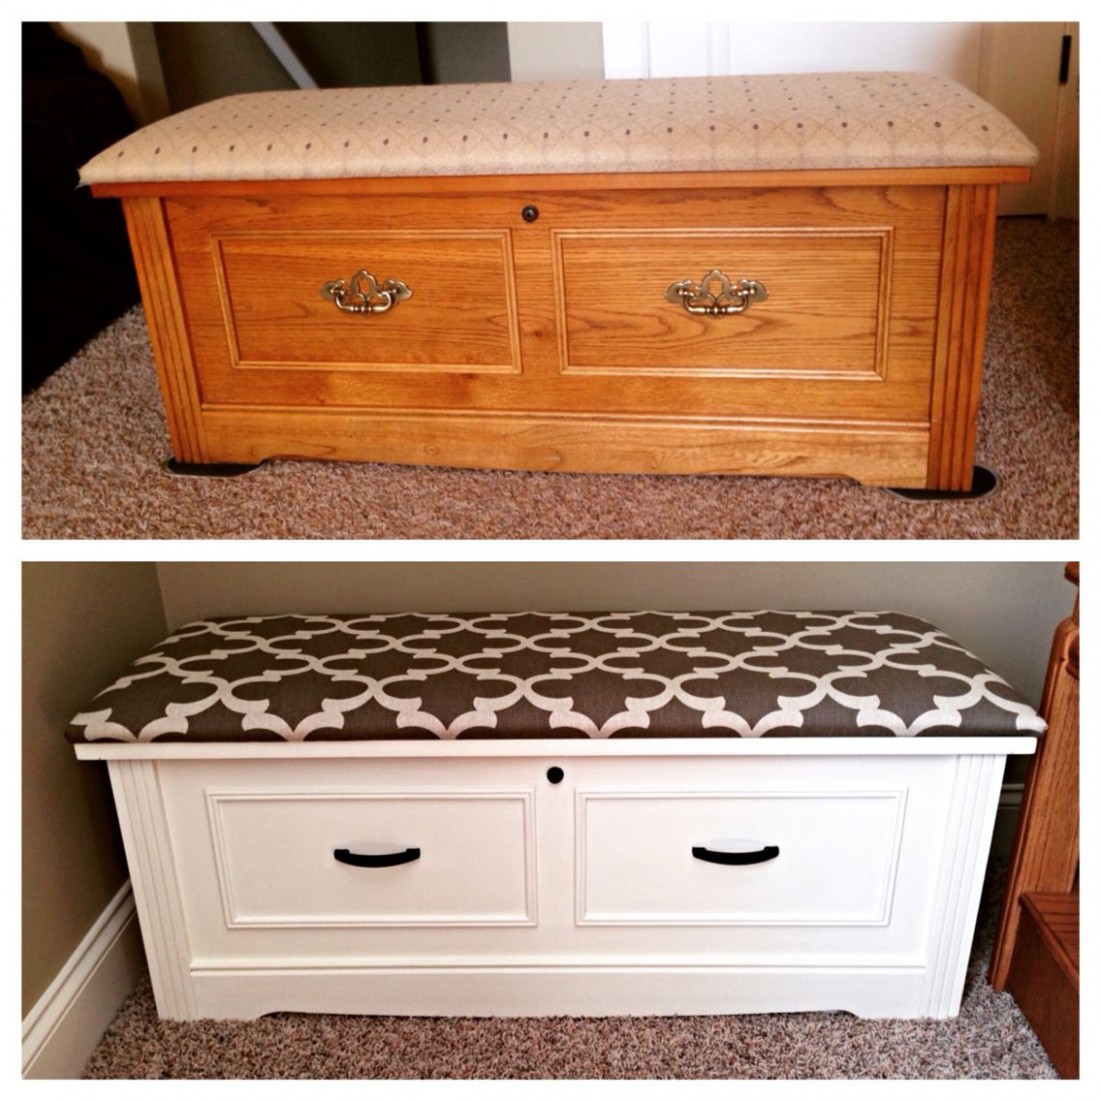 6 Lane Hope Chest Updated For $6! Annie Sloan Chalkpaint In ..